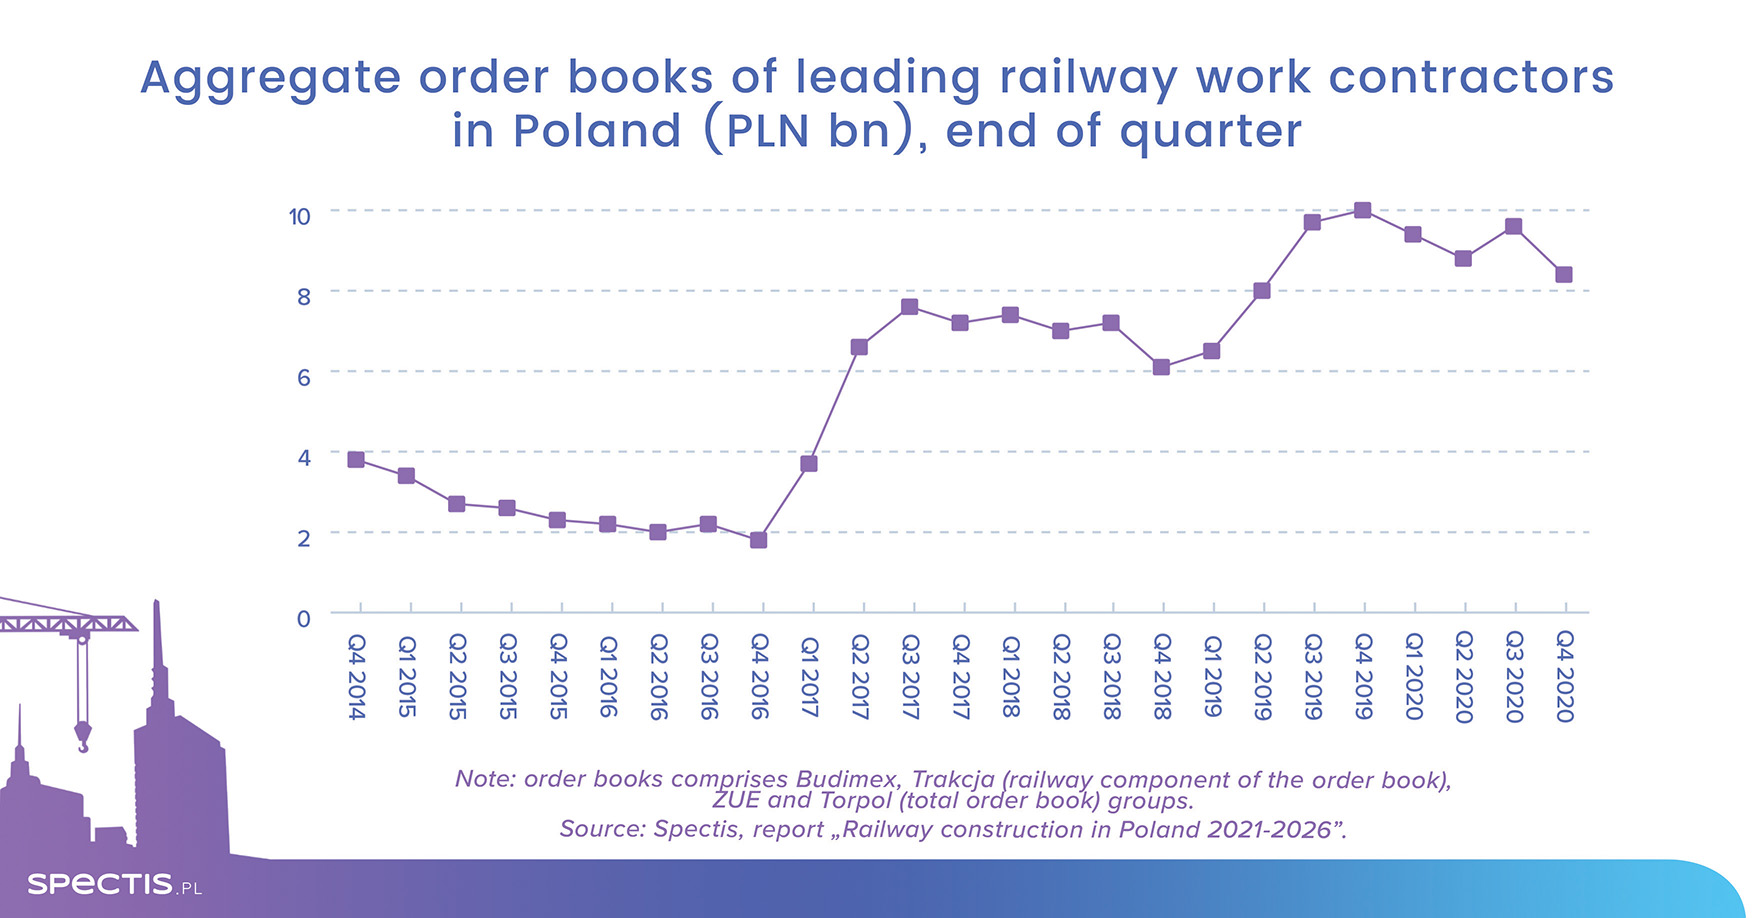 Over 200 railway projects in Poland worth PLN 120bn